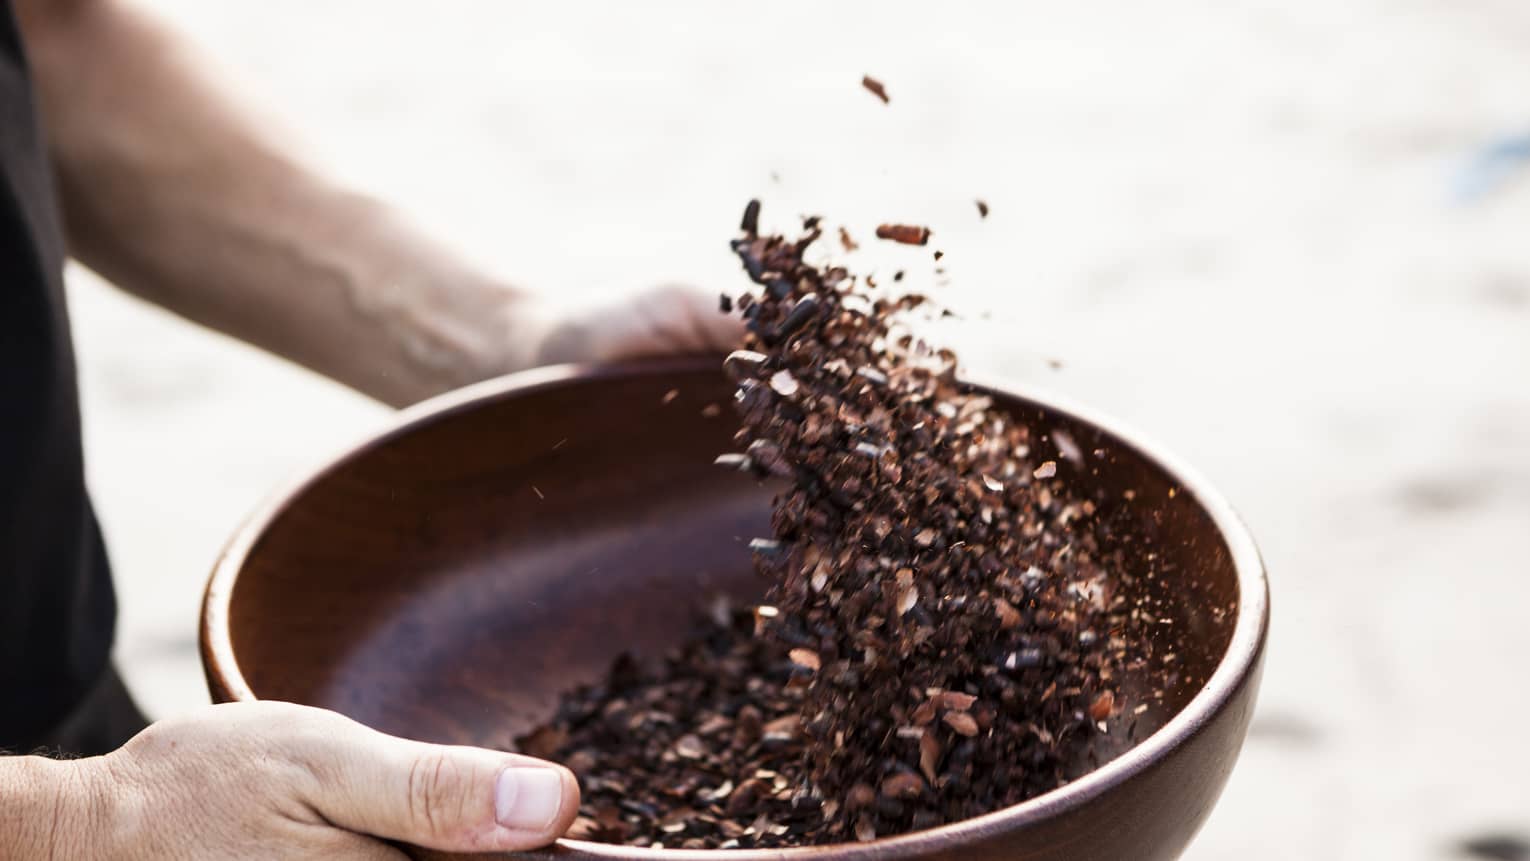 Close-up of hands holding dark wood bowl, shaking crushed cocoa